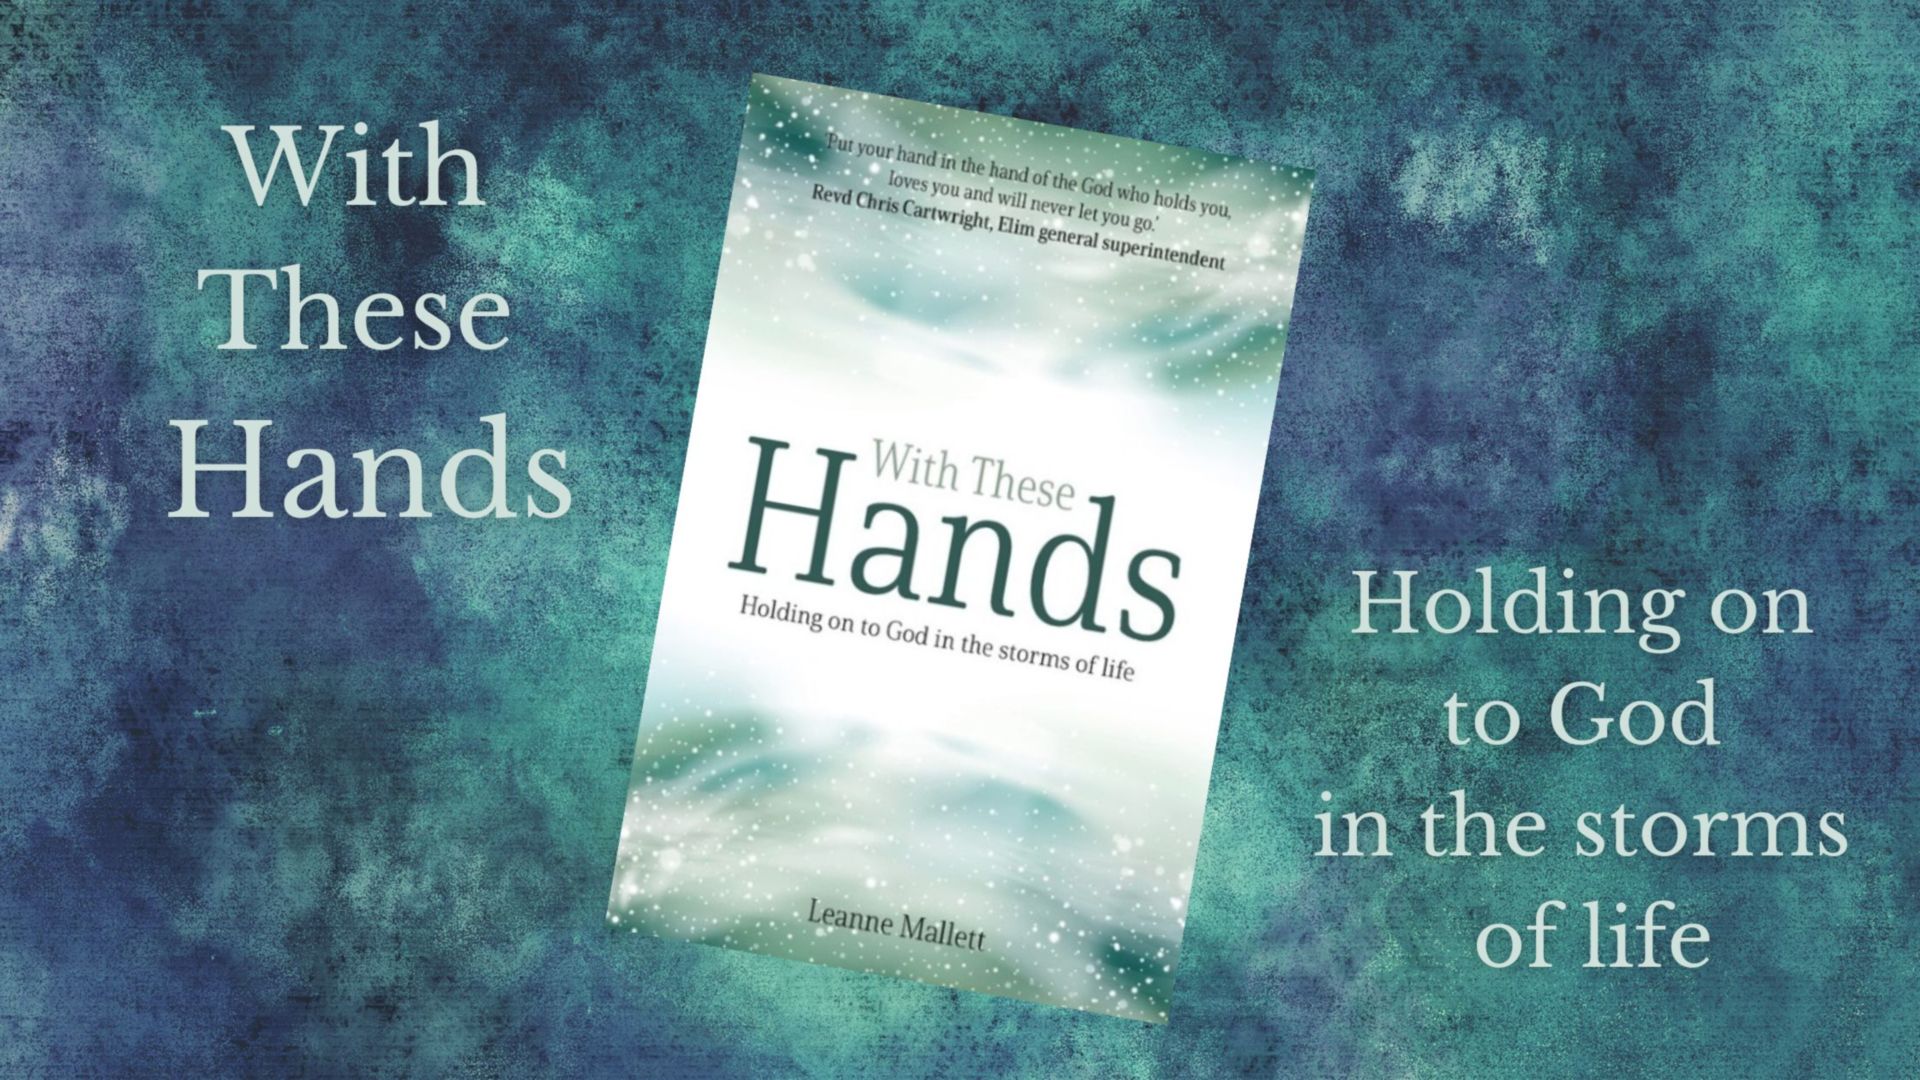 An interview with Leanne Mallett, author of 'With These Hands'